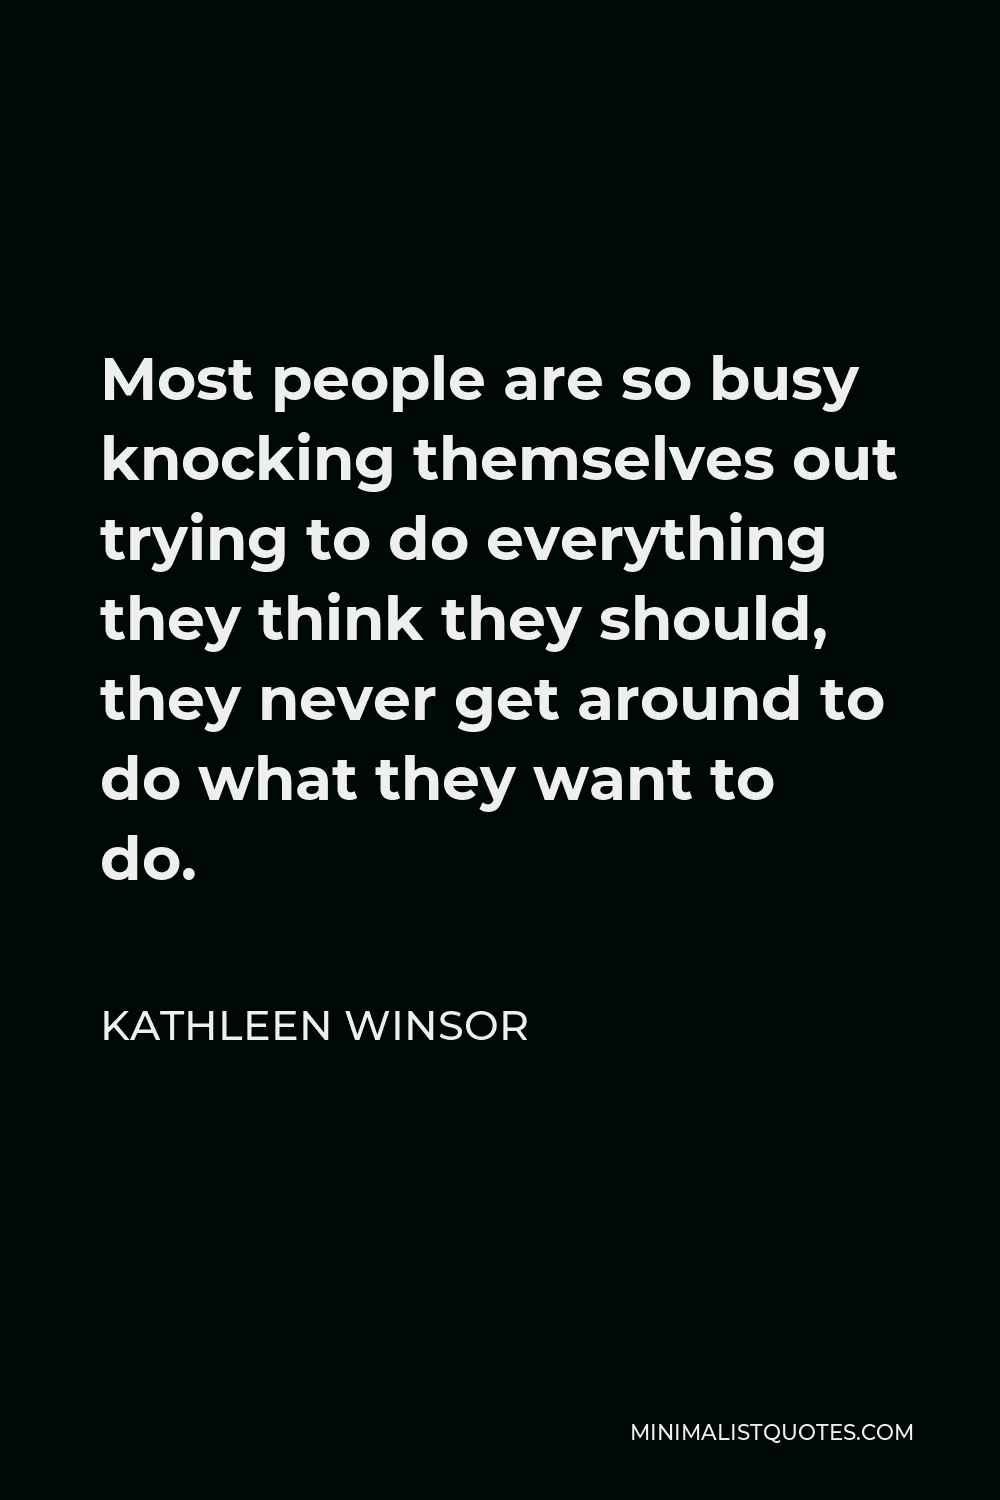 Kathleen Winsor Quote - Most people are so busy knocking themselves out trying to do everything they think they should, they never get around to do what they want to do.